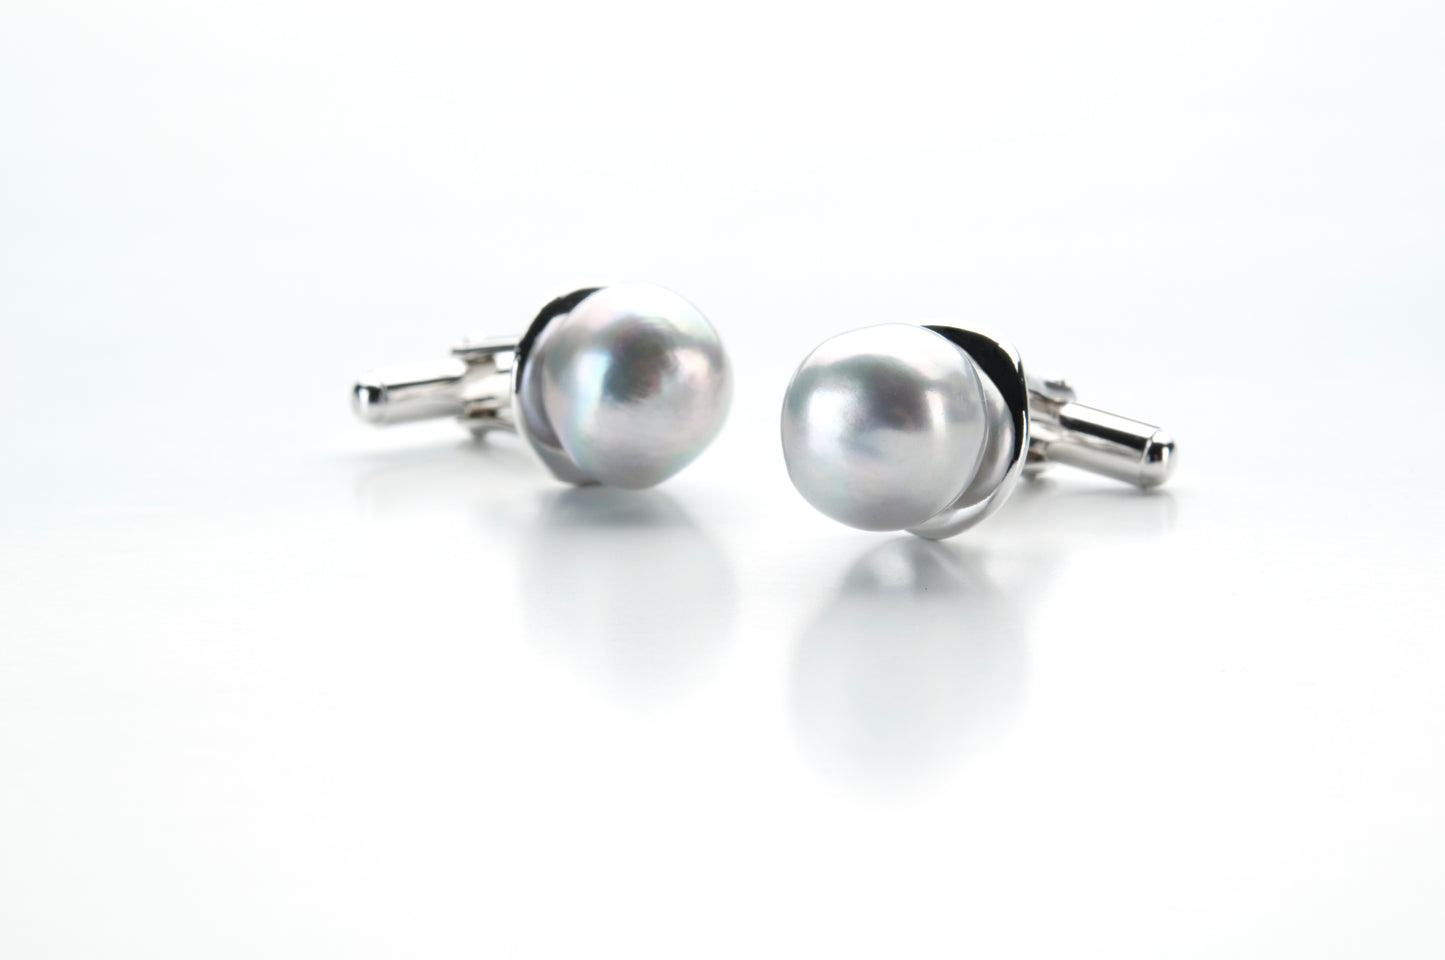 Round cufflinks in sterling silver and pearls